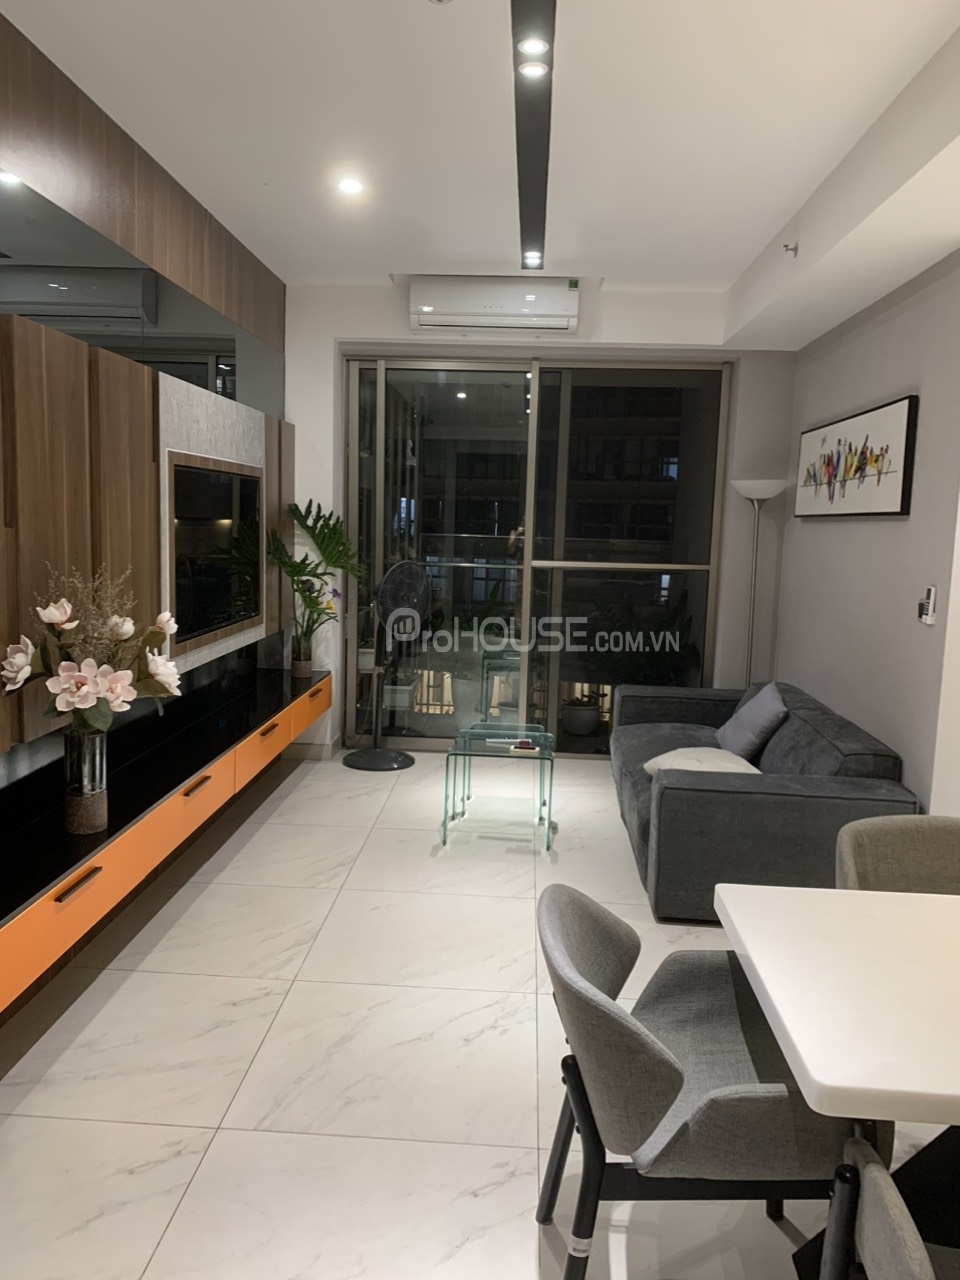 2 bedroom luxury apartment for rent with full furniture in Midtown Phu My Hung